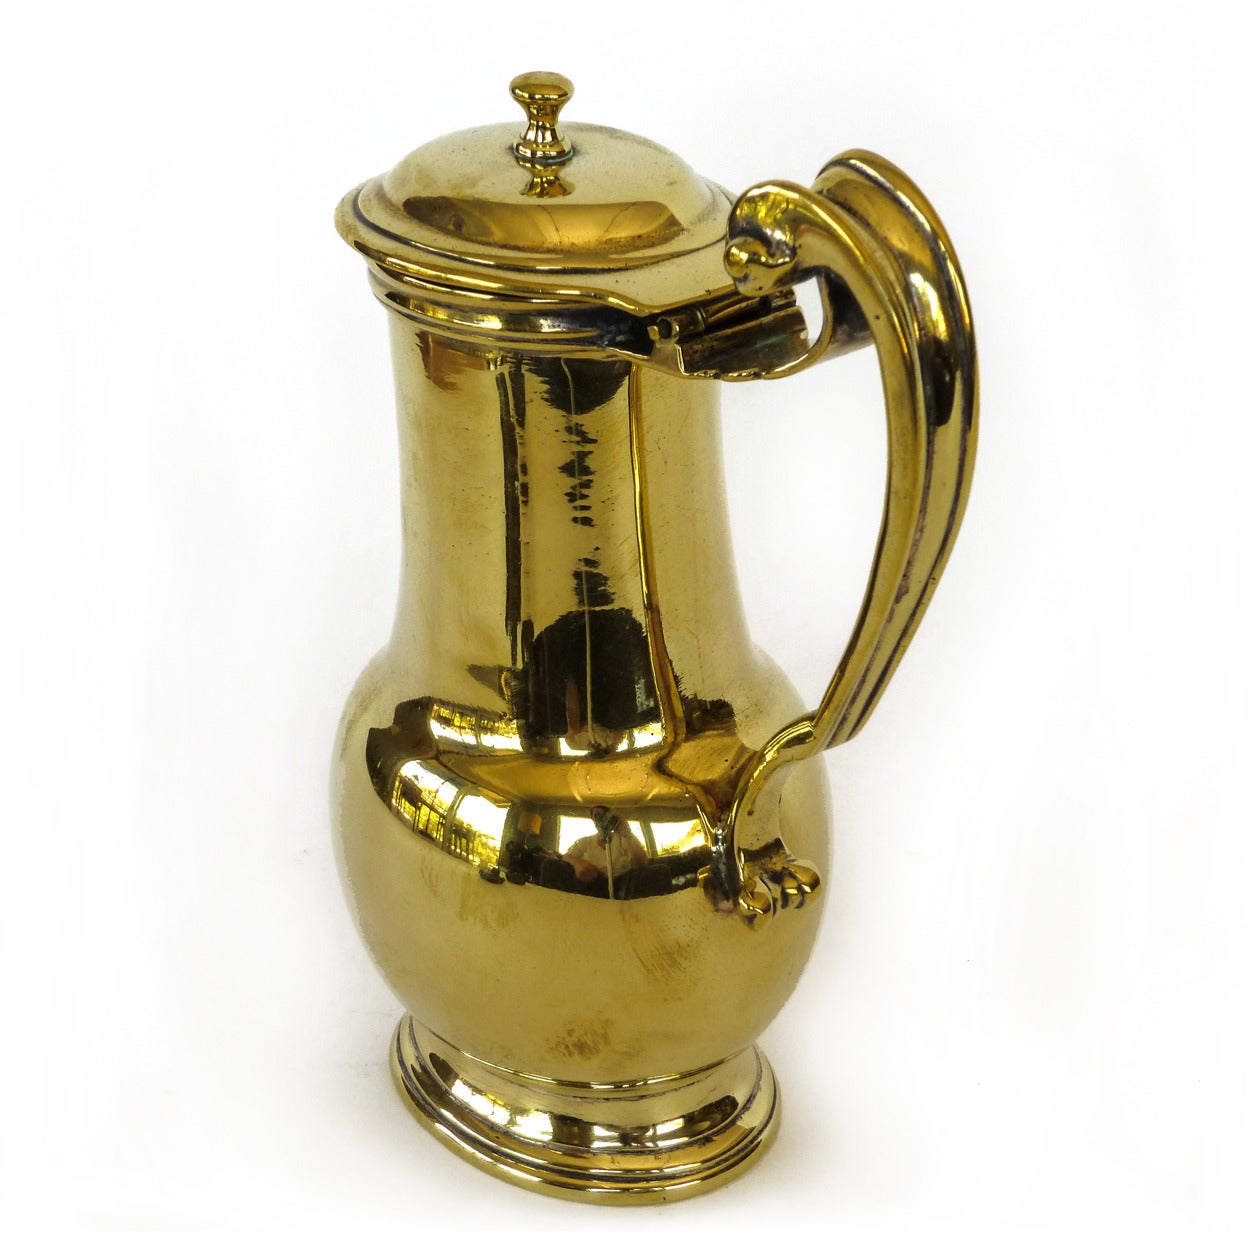 French Brass “Silver Form” Hot Water or Shaving Ewer. Ex “Casimir Collection” Circa 1725.